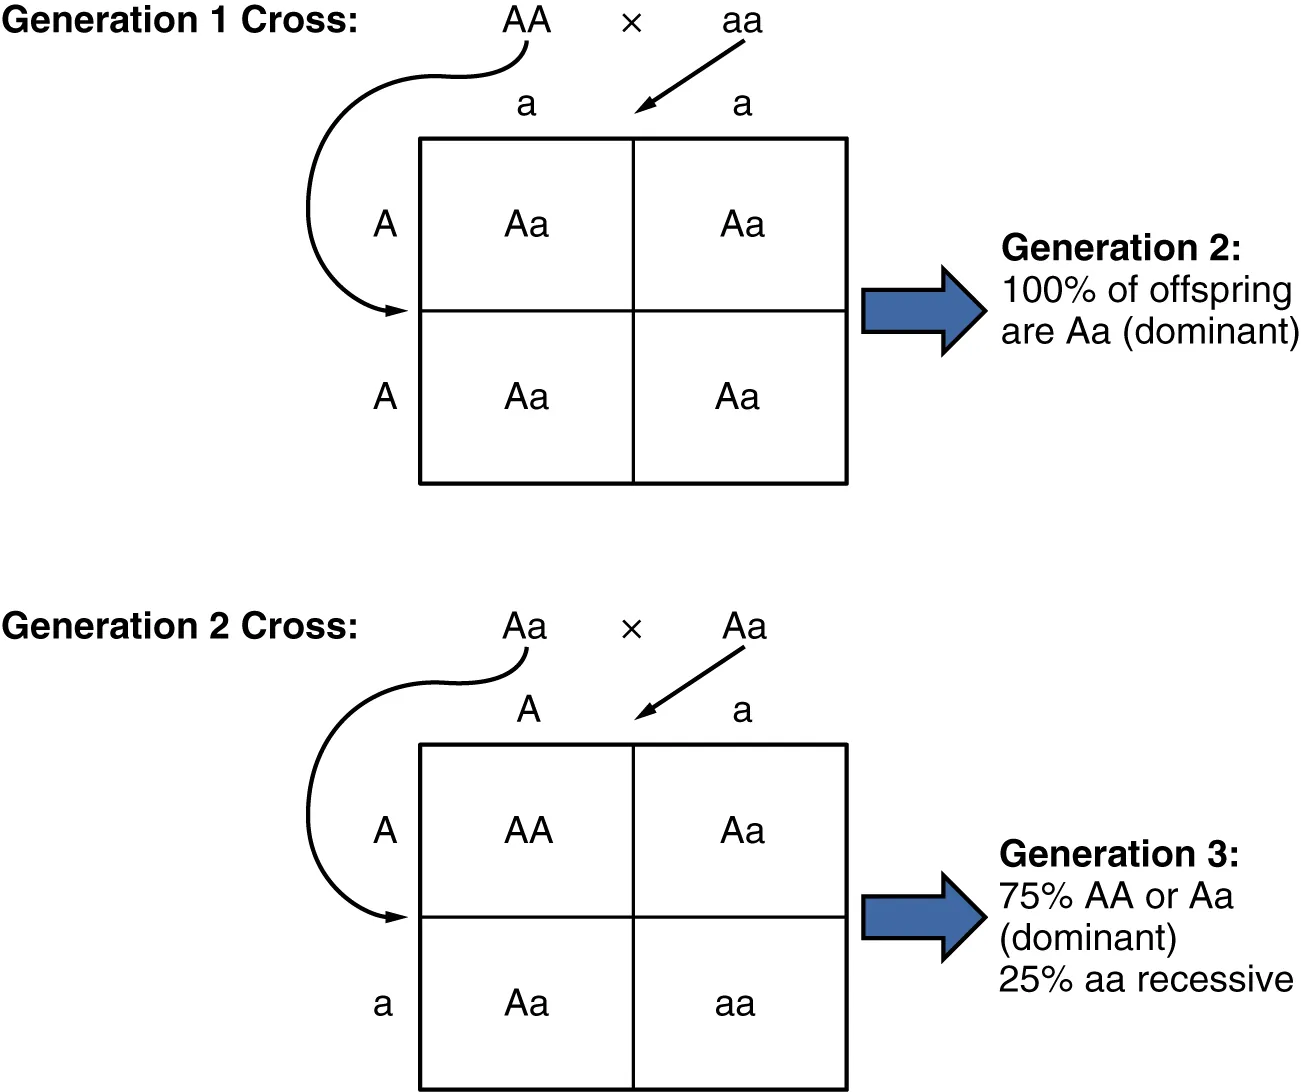 This diagram shows the genetics experiment conducted by Mendel. The top panel shows the offspring from first generation cross and the bottom panel shows the offspring from the second generation cross.